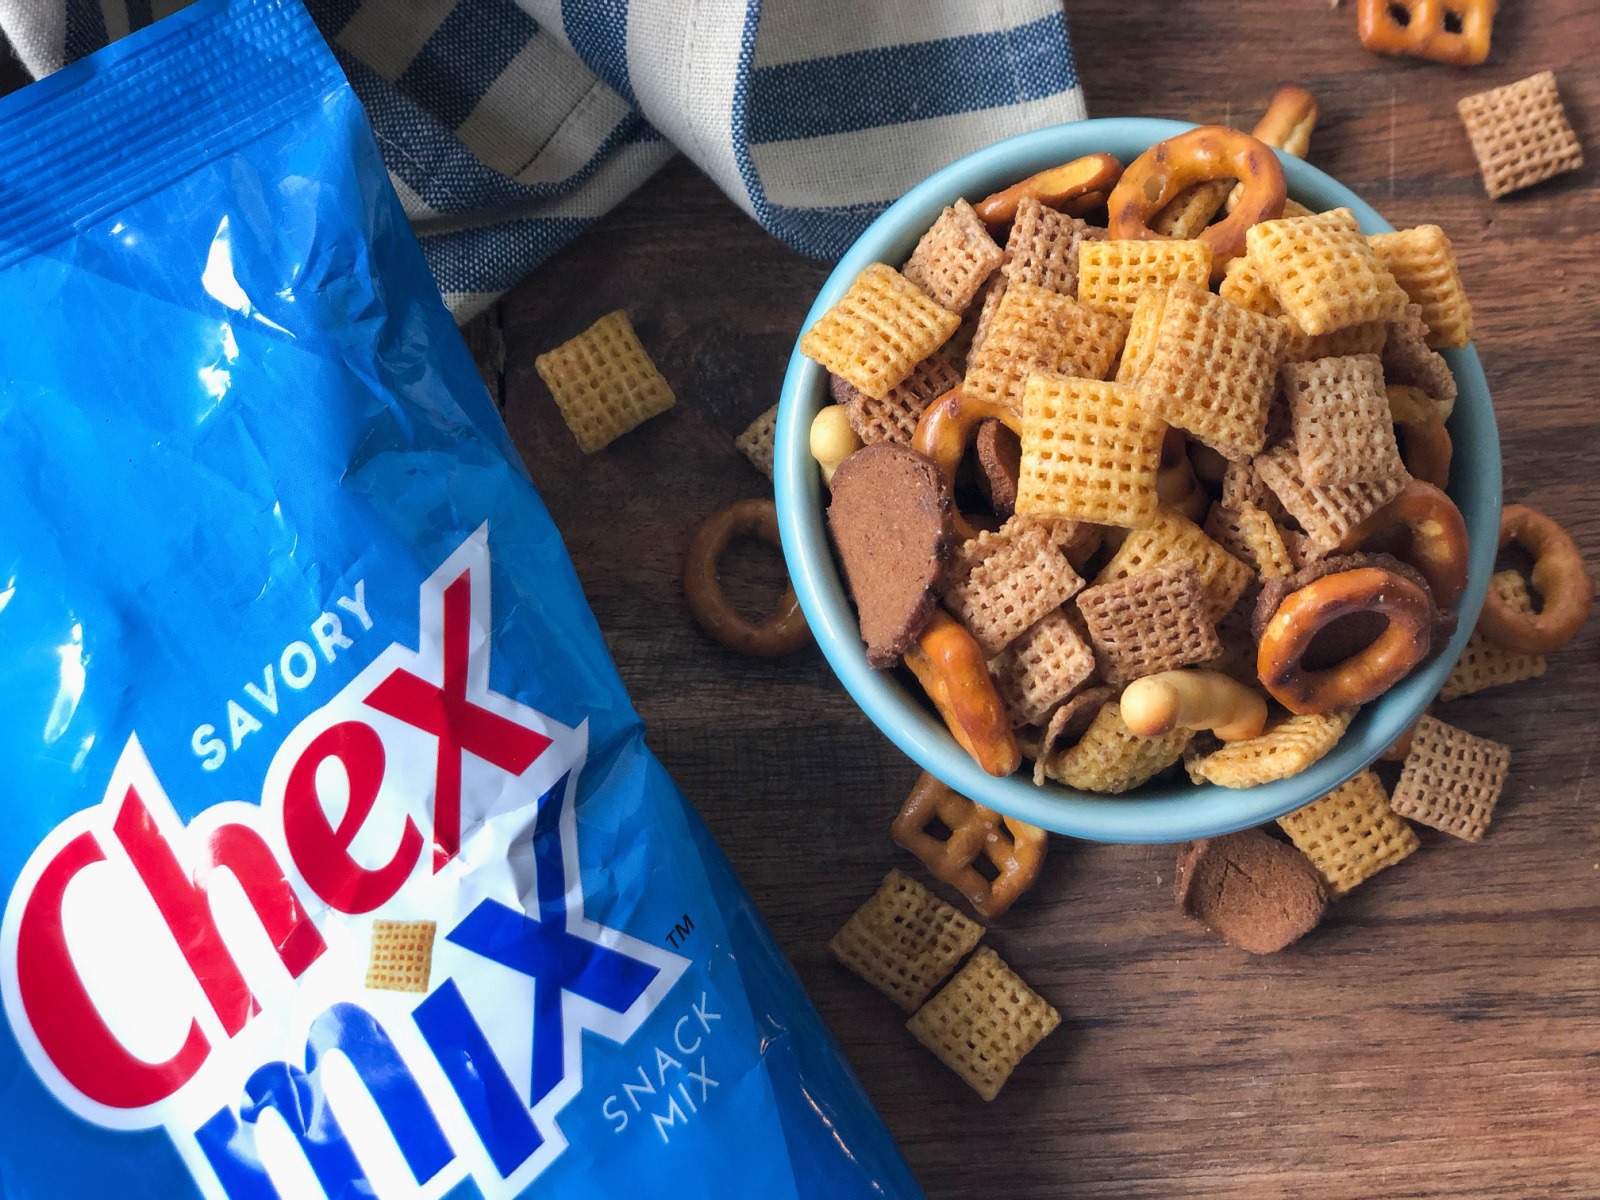 Get Chex Mix For As Little As $1.44 Per Bag At Publix